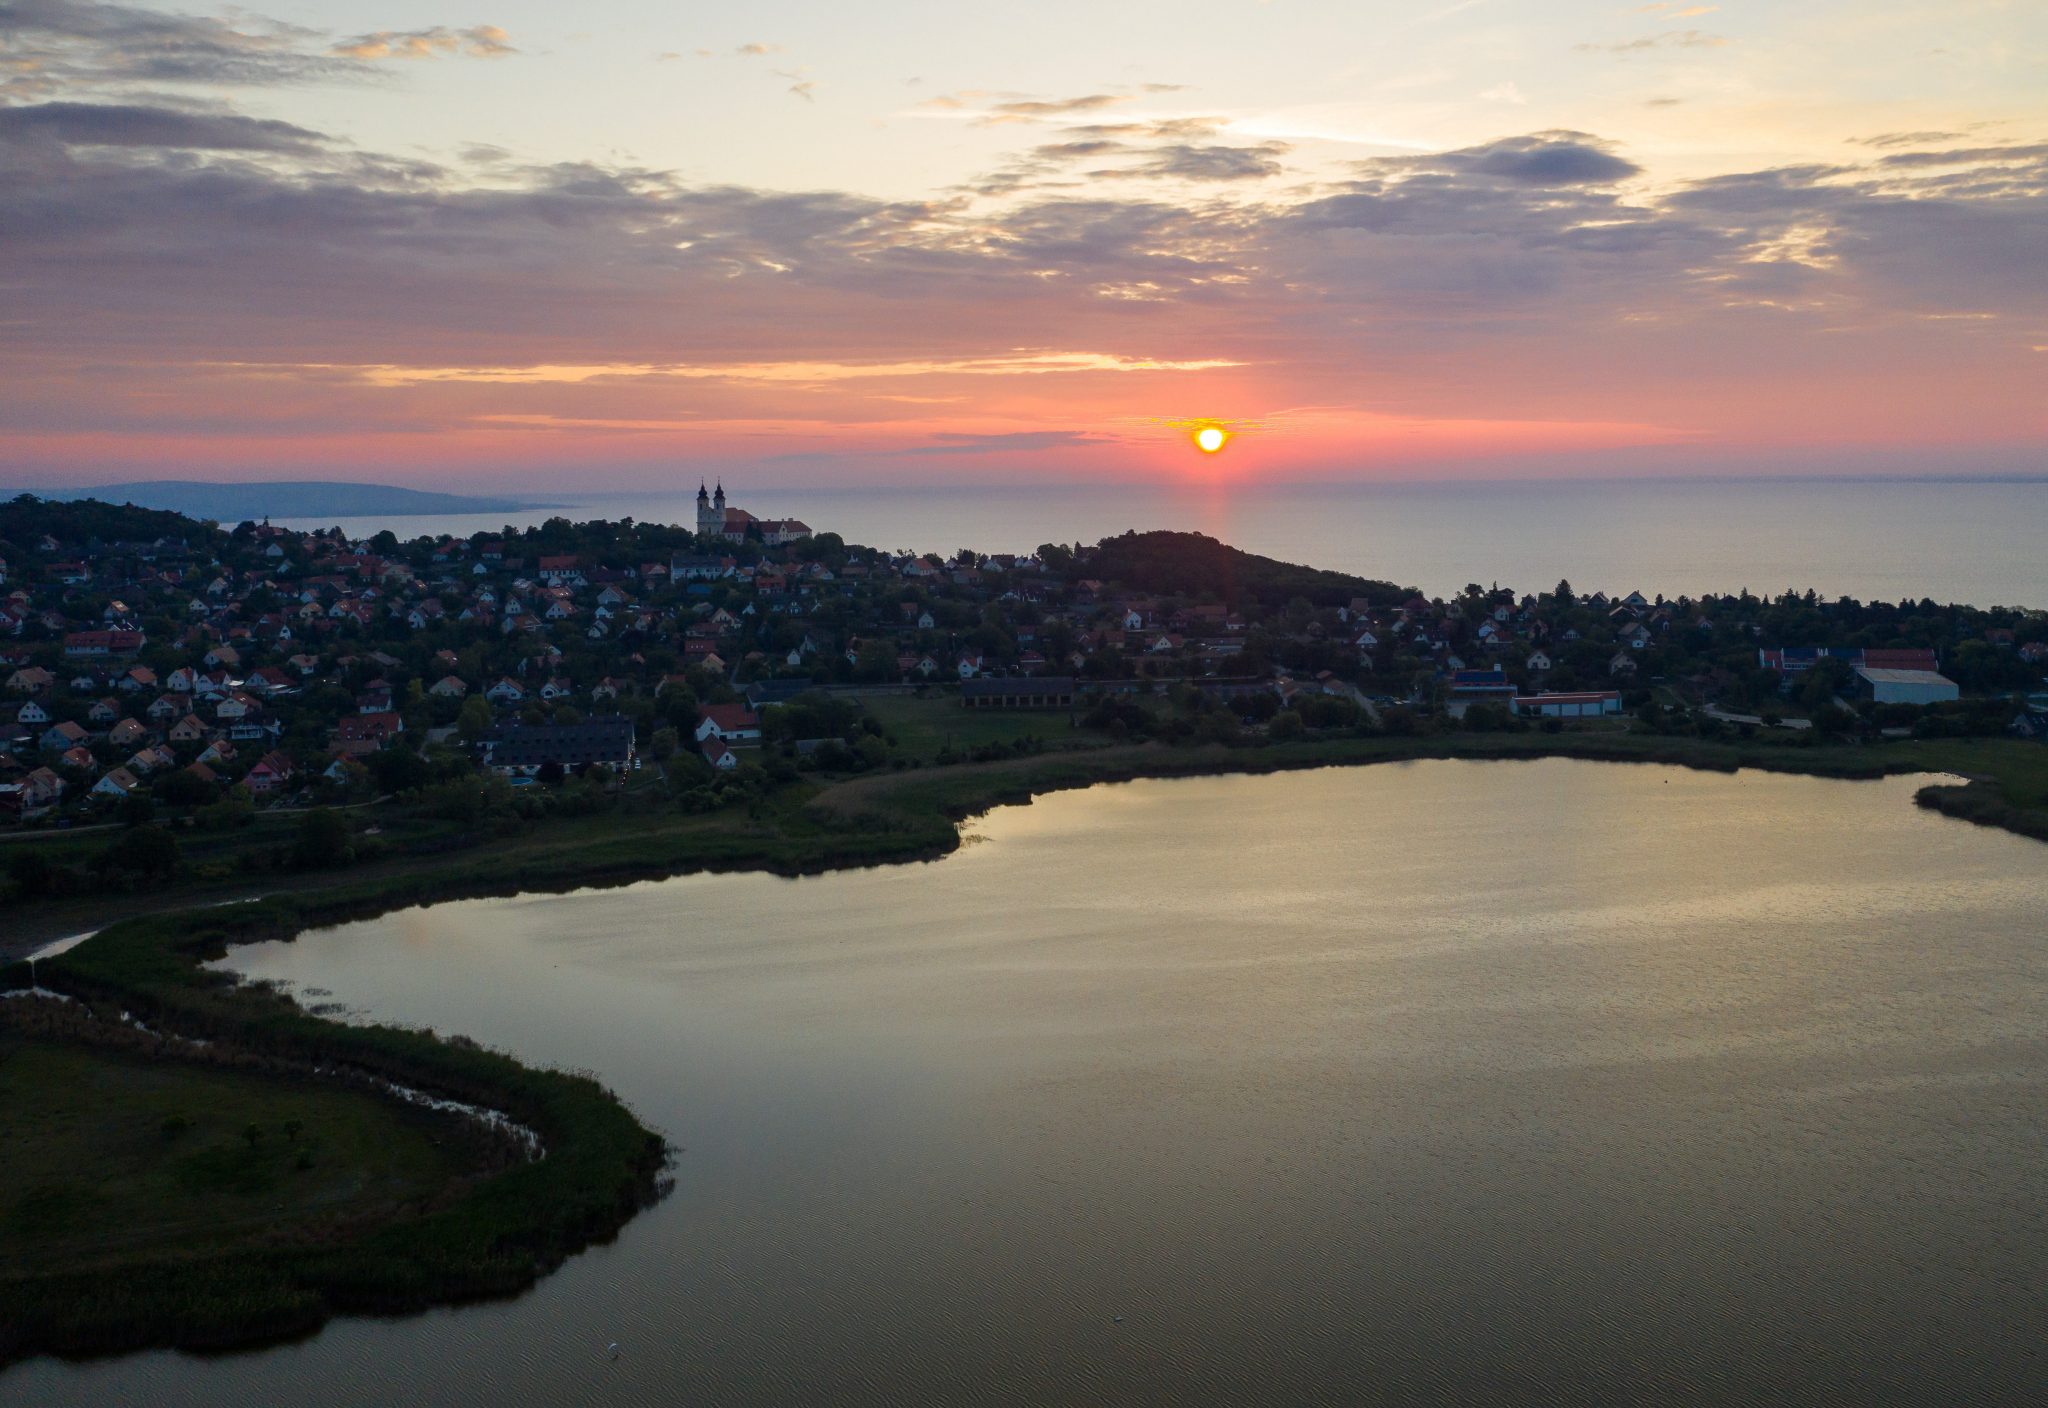 Socialists Request Constitutional Review of Lake Balaton Construction Regulations